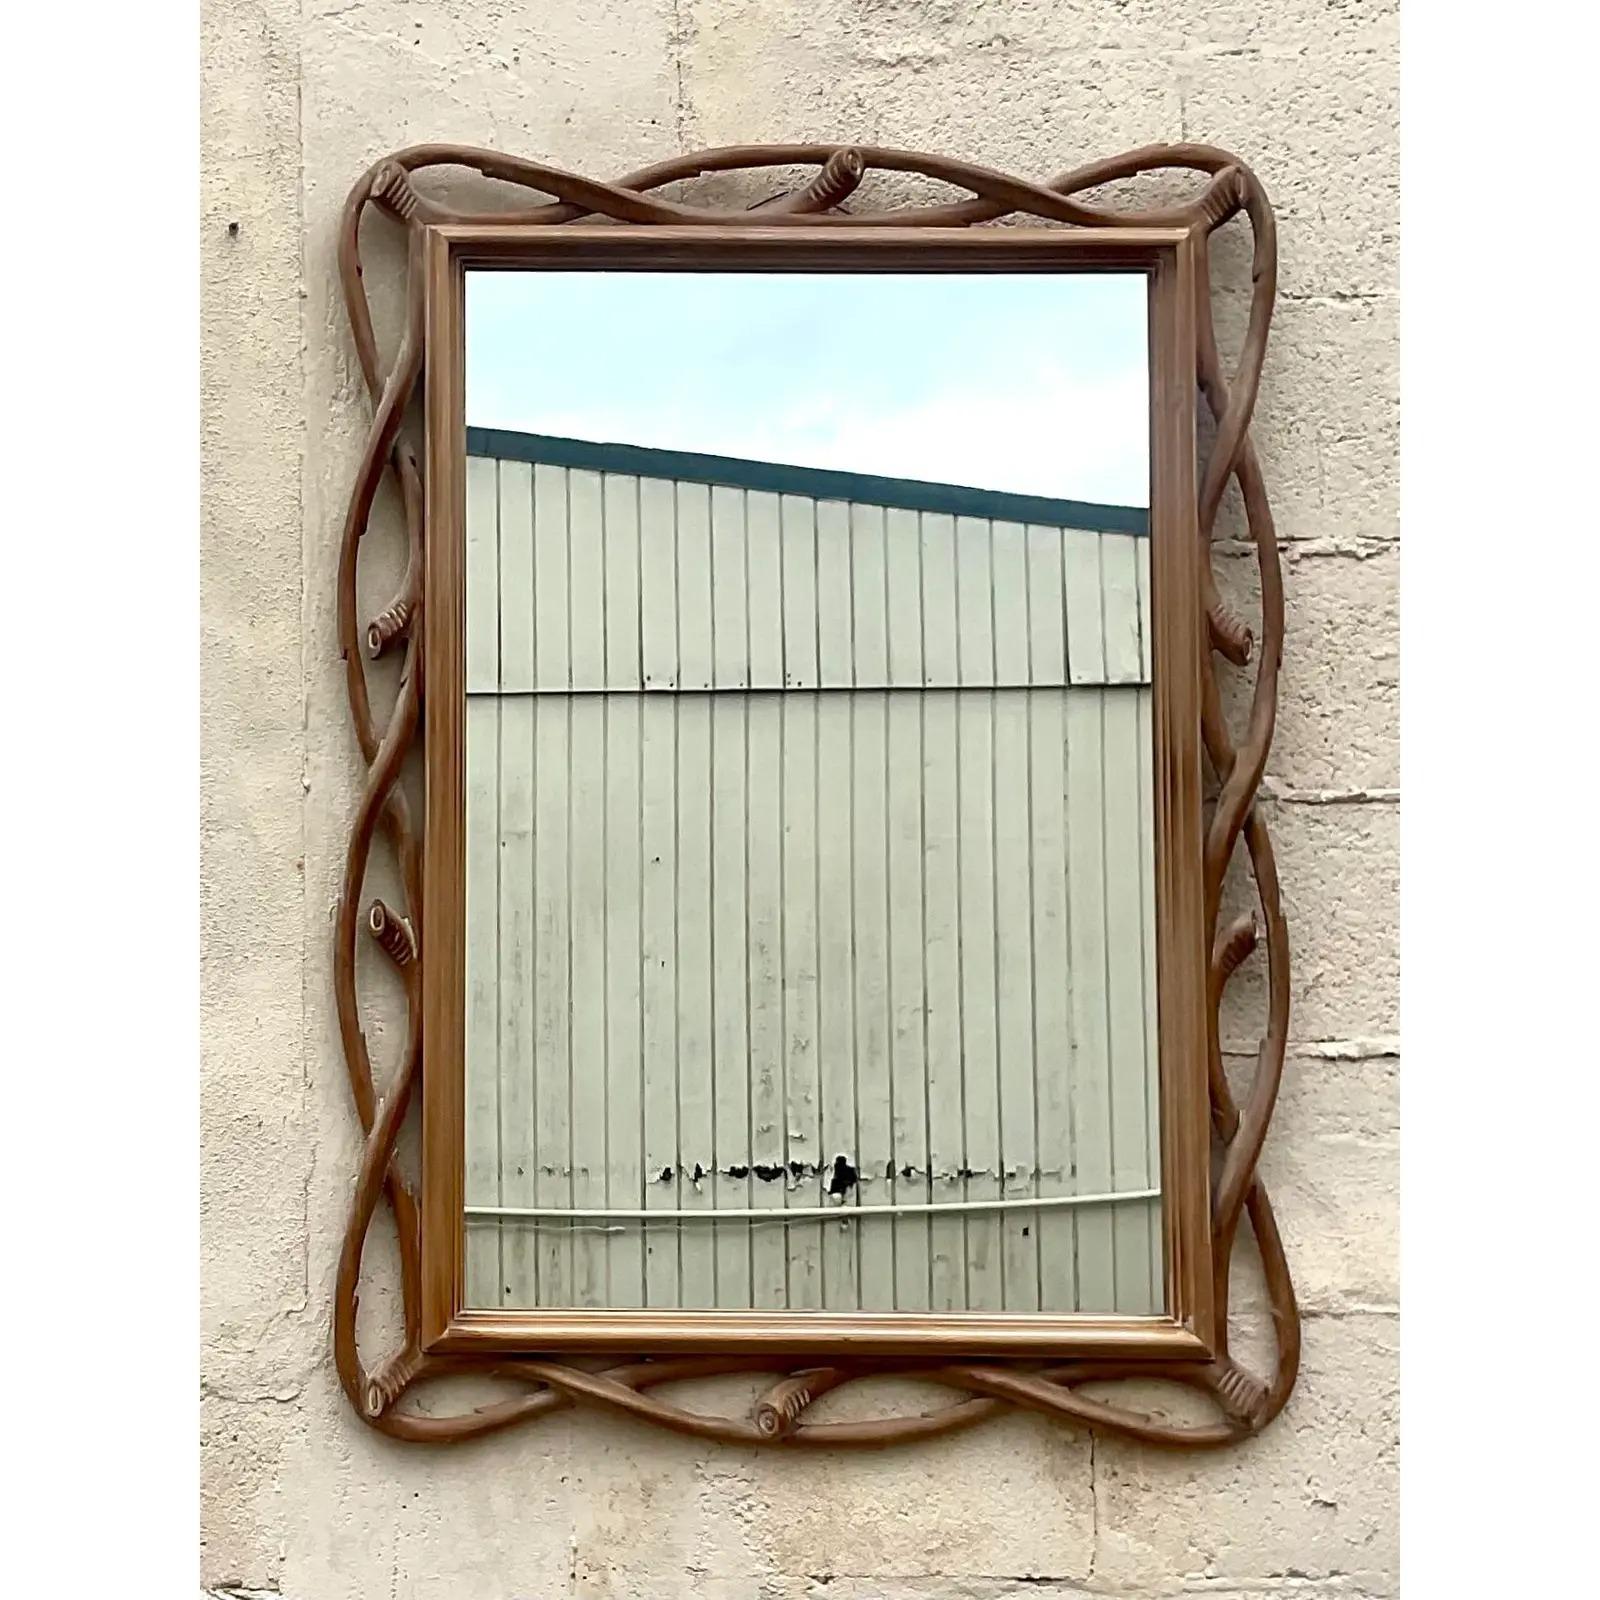 A stunning vintage Regency 80s wall mirror. Made by the iconic Decorative Crafts Group. Beautiful Faux Bois design with a very light cerused finish. Acquired from a Palm Beach estate.